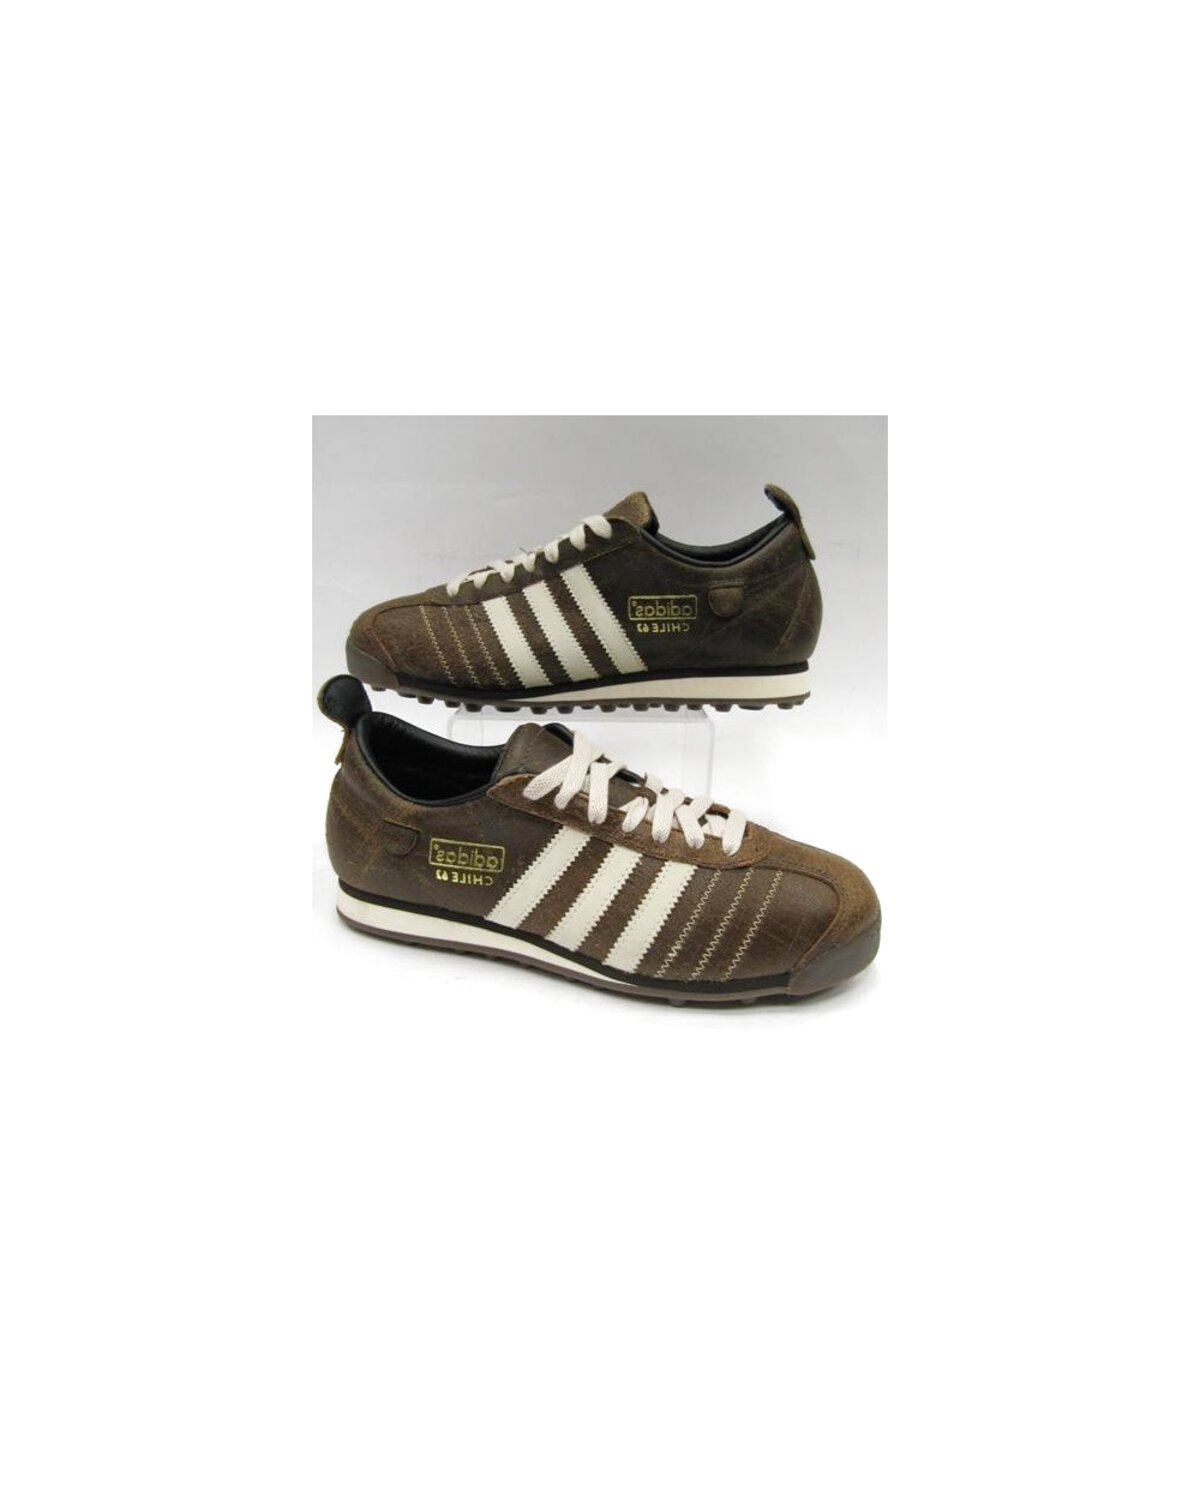 adidas chile 62 trainers size 9